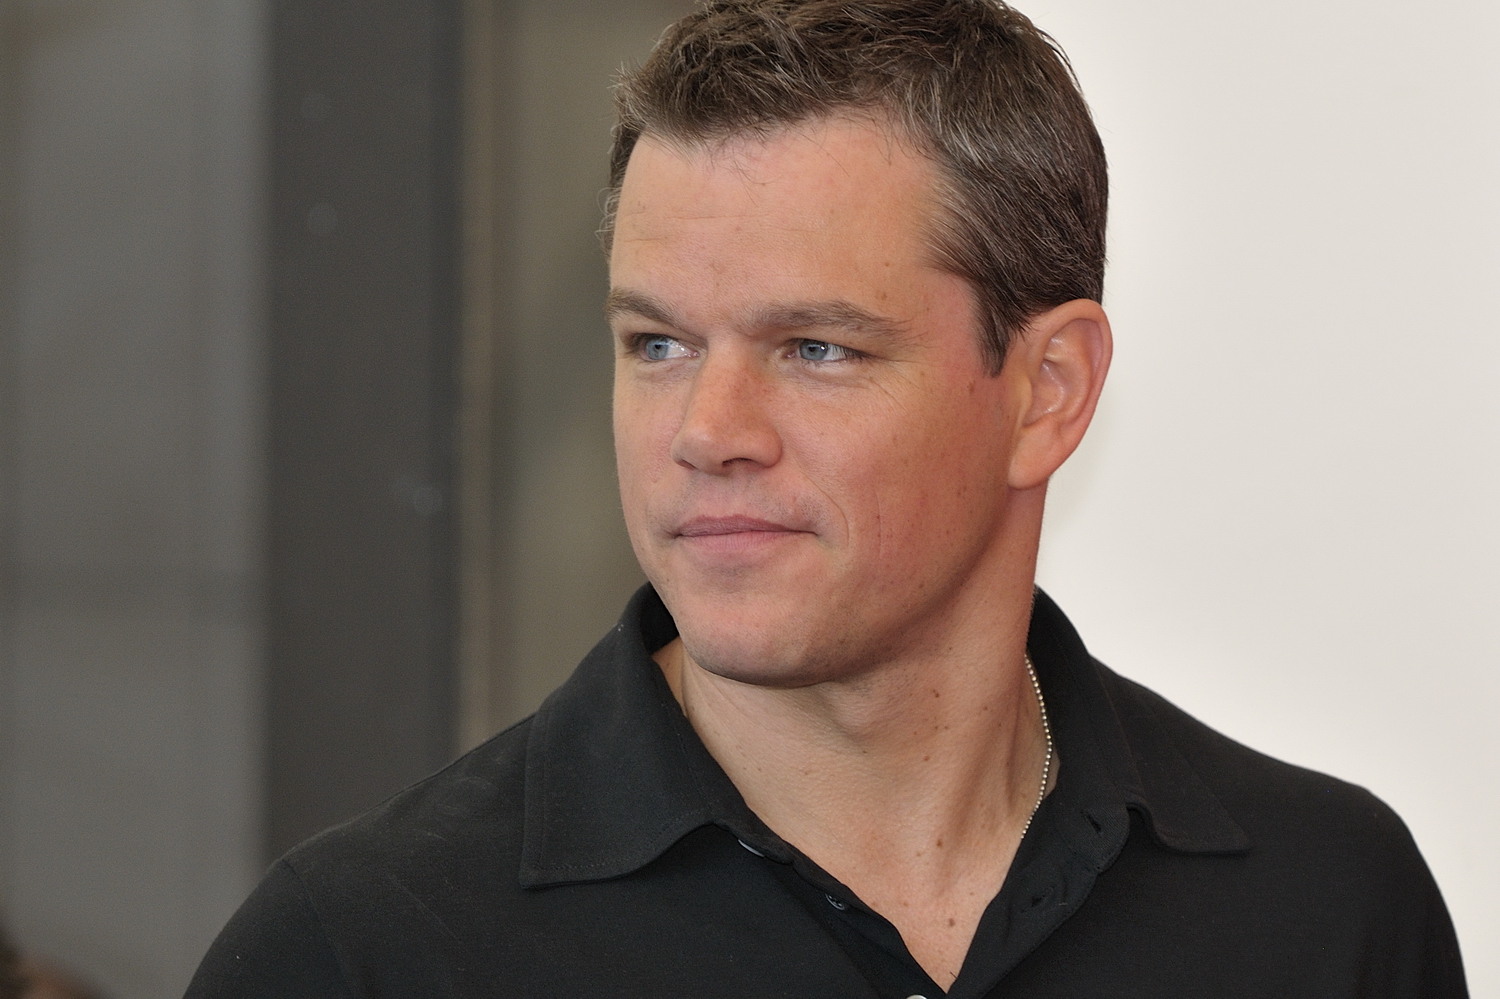 Matt Damon turned down 'Avatar' lead role, lost out on $250 mn payout